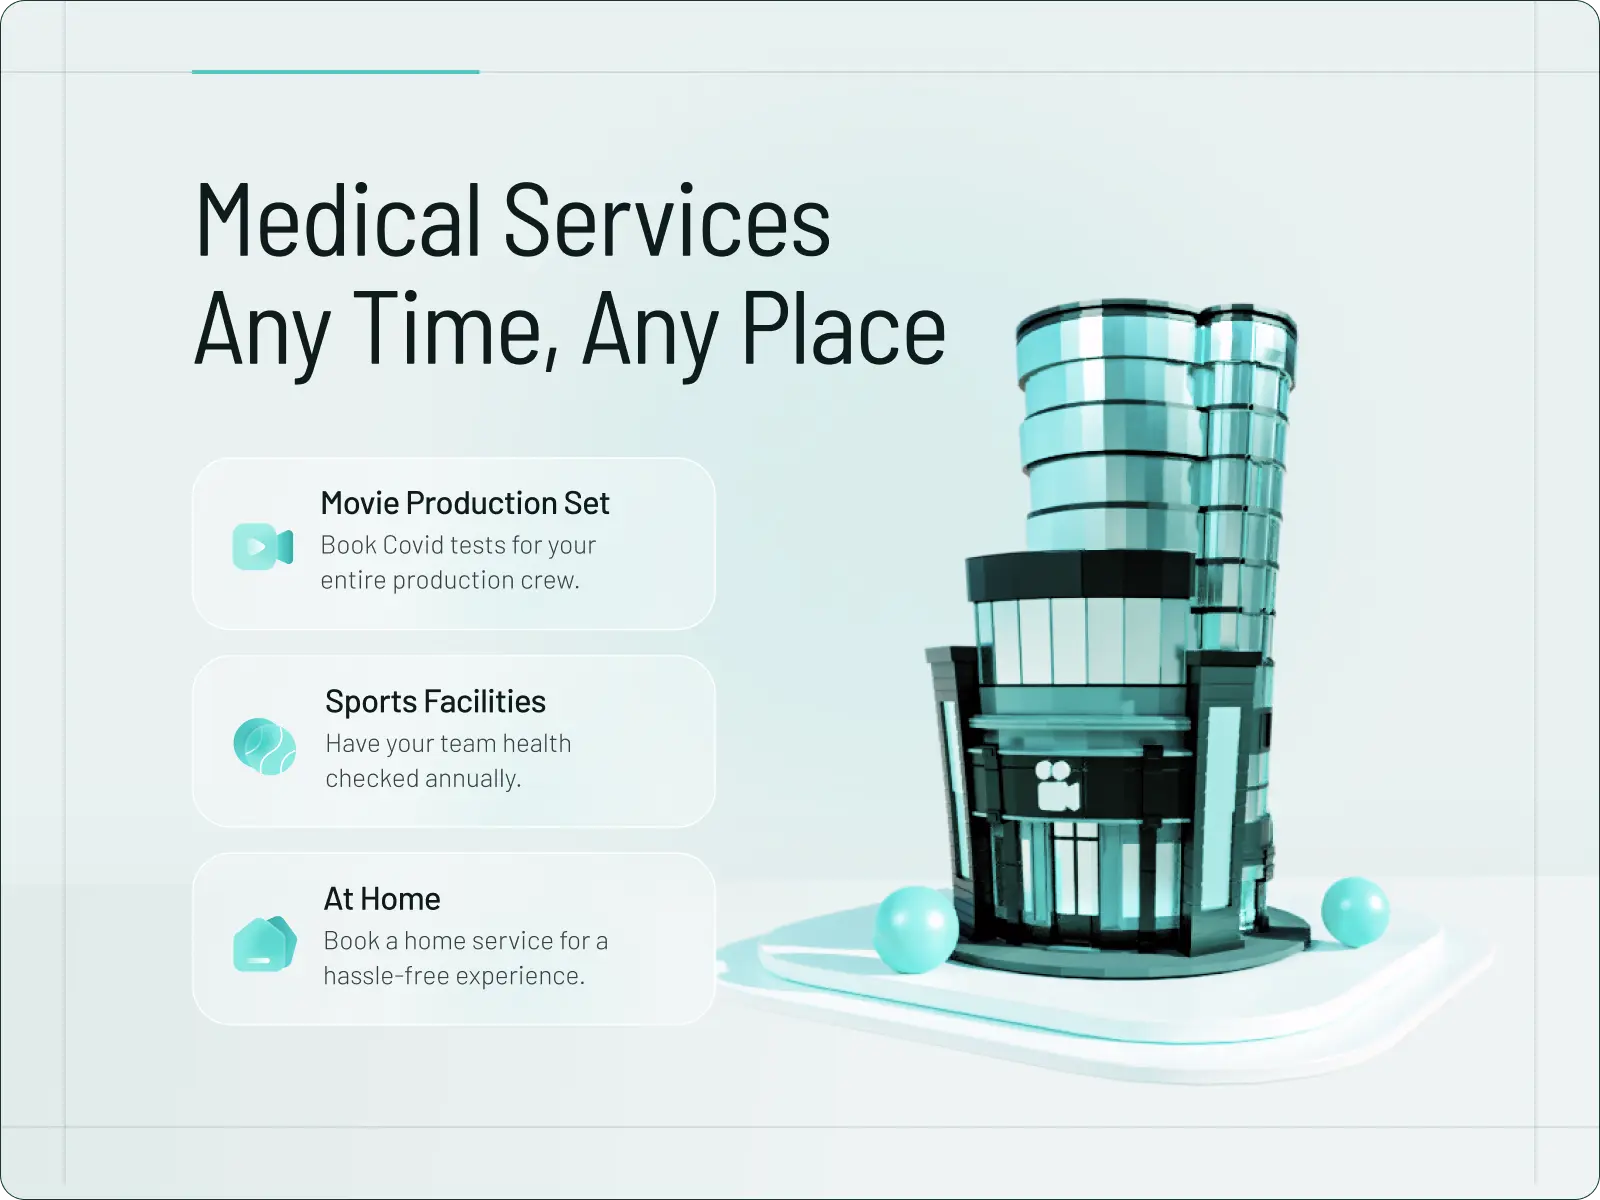 The larger inscription "Medical Services Any Time, Any Place" on a light background with mint tints. On the right, a 3D model of three connected buildings - a movie production set, a sports facility and a residential skyscraper.